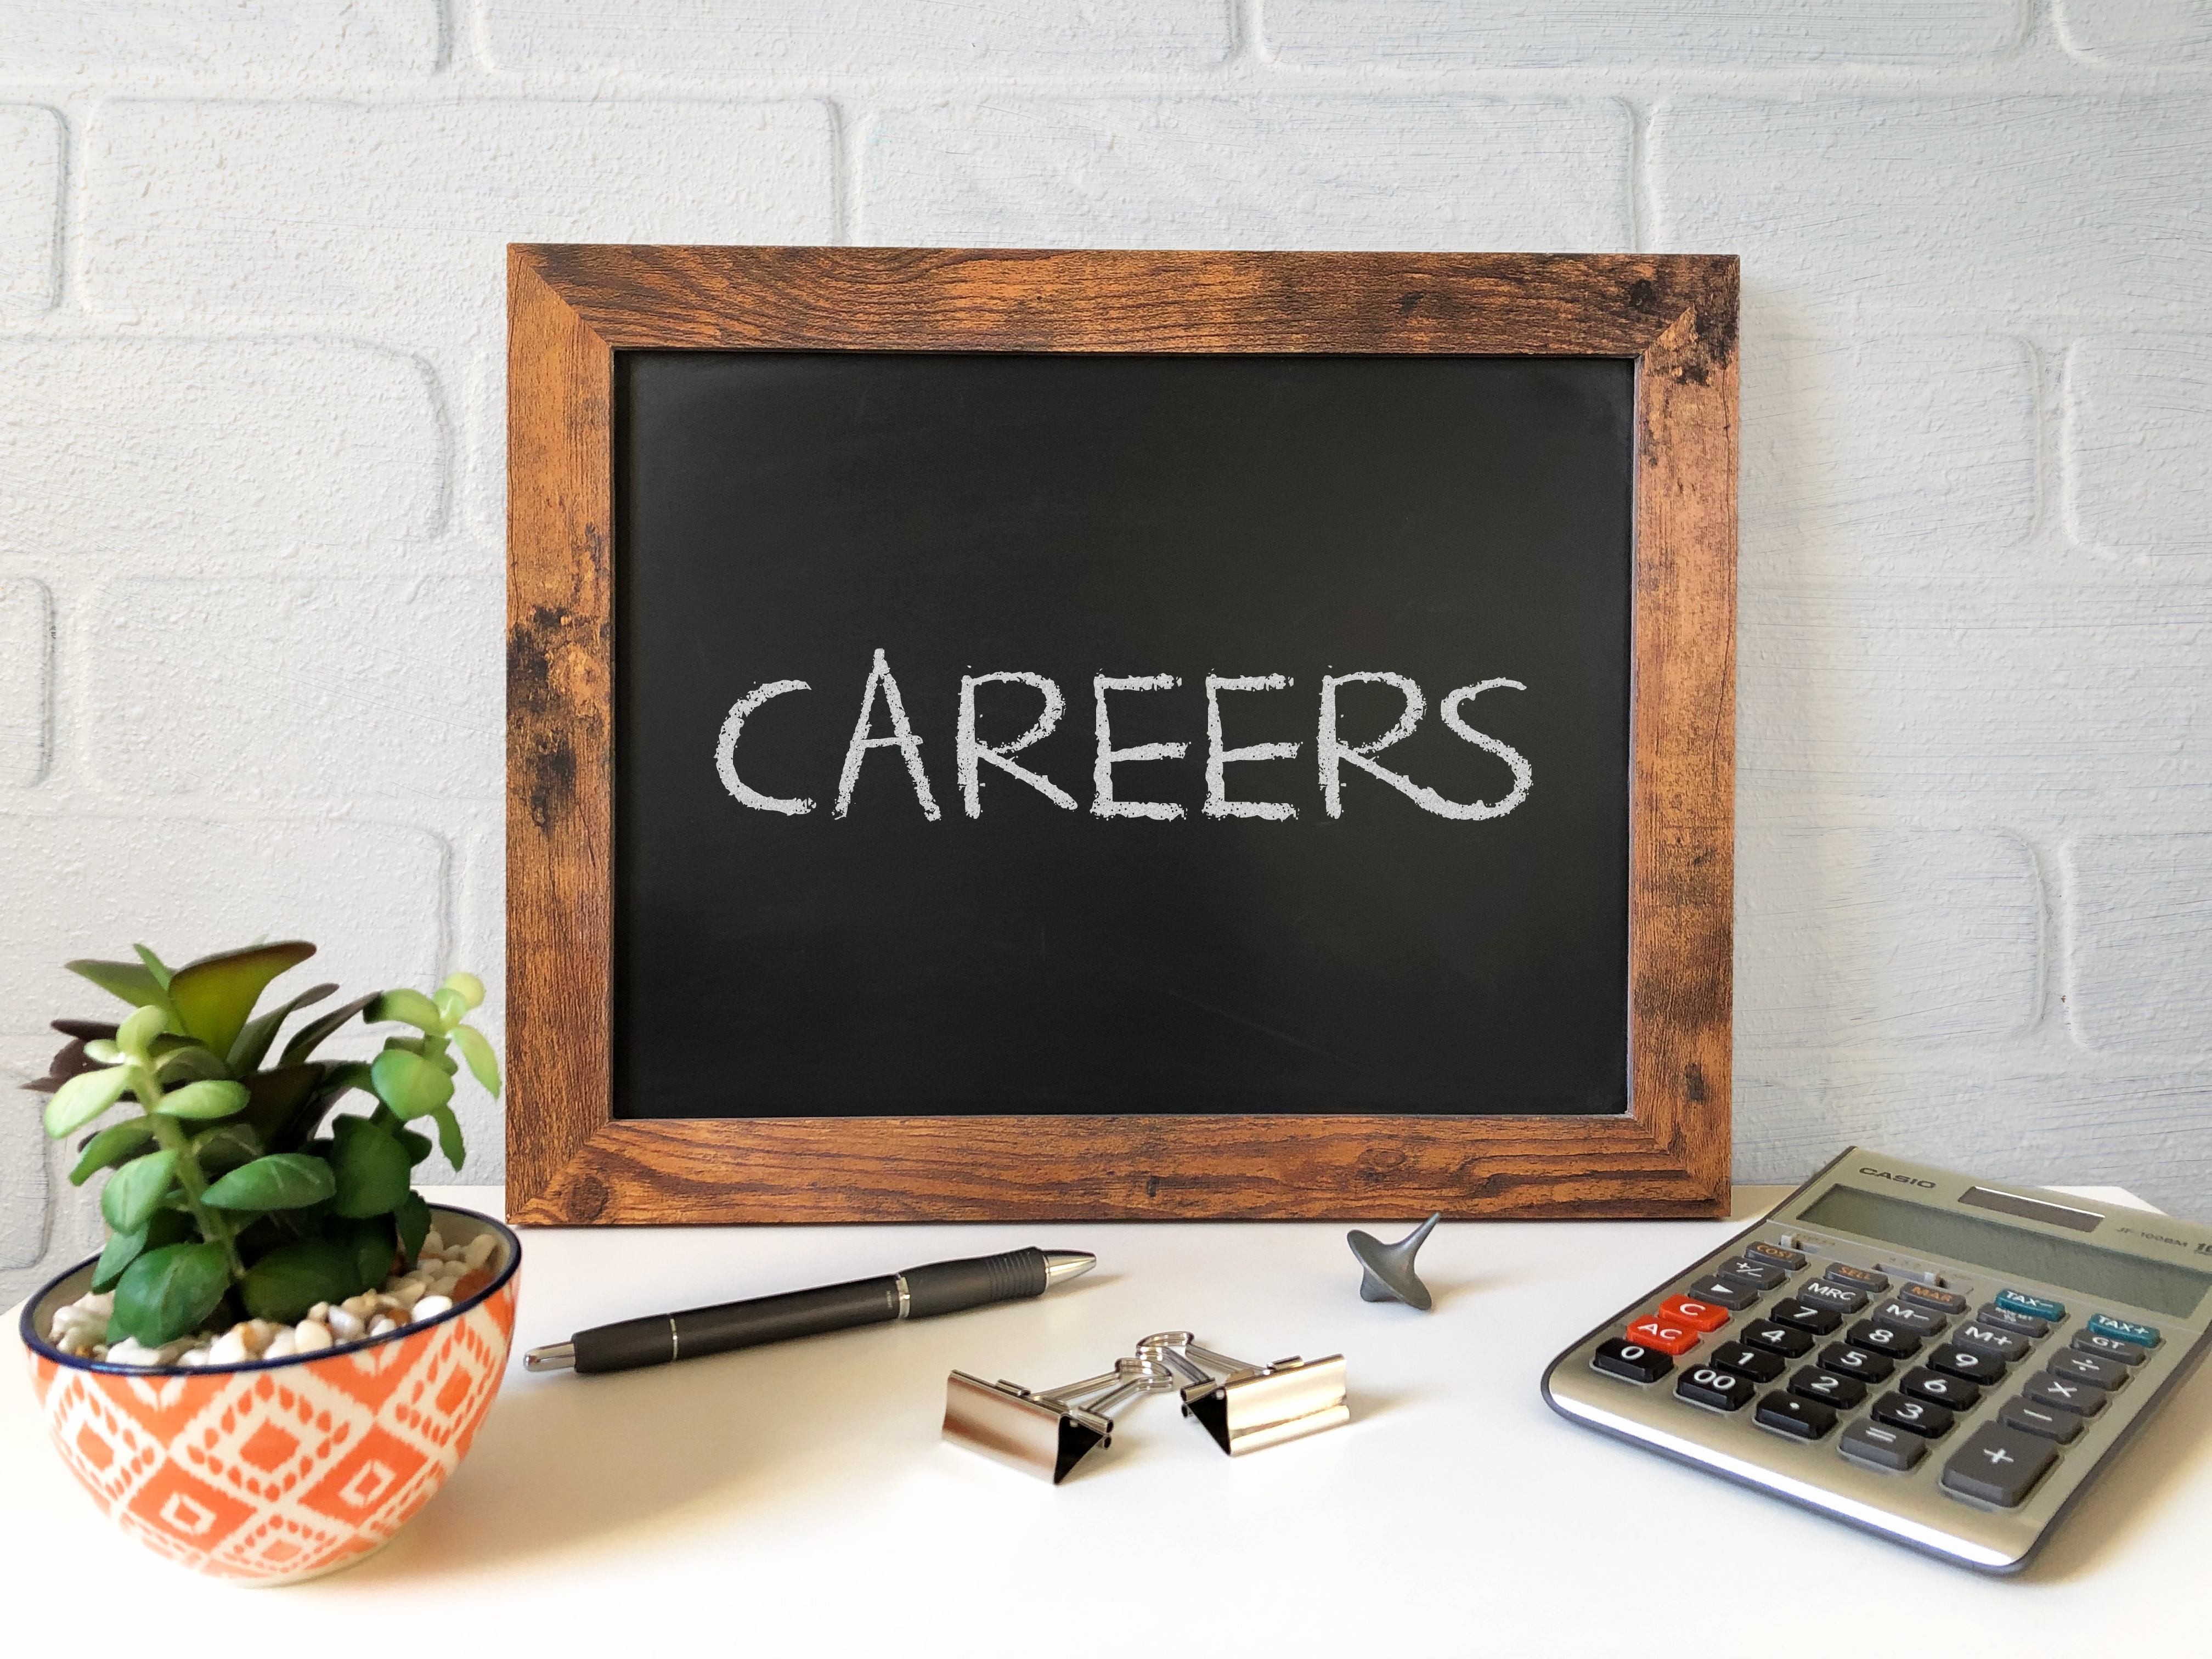 Blackboard with word "Careers" on table with plant and calculator